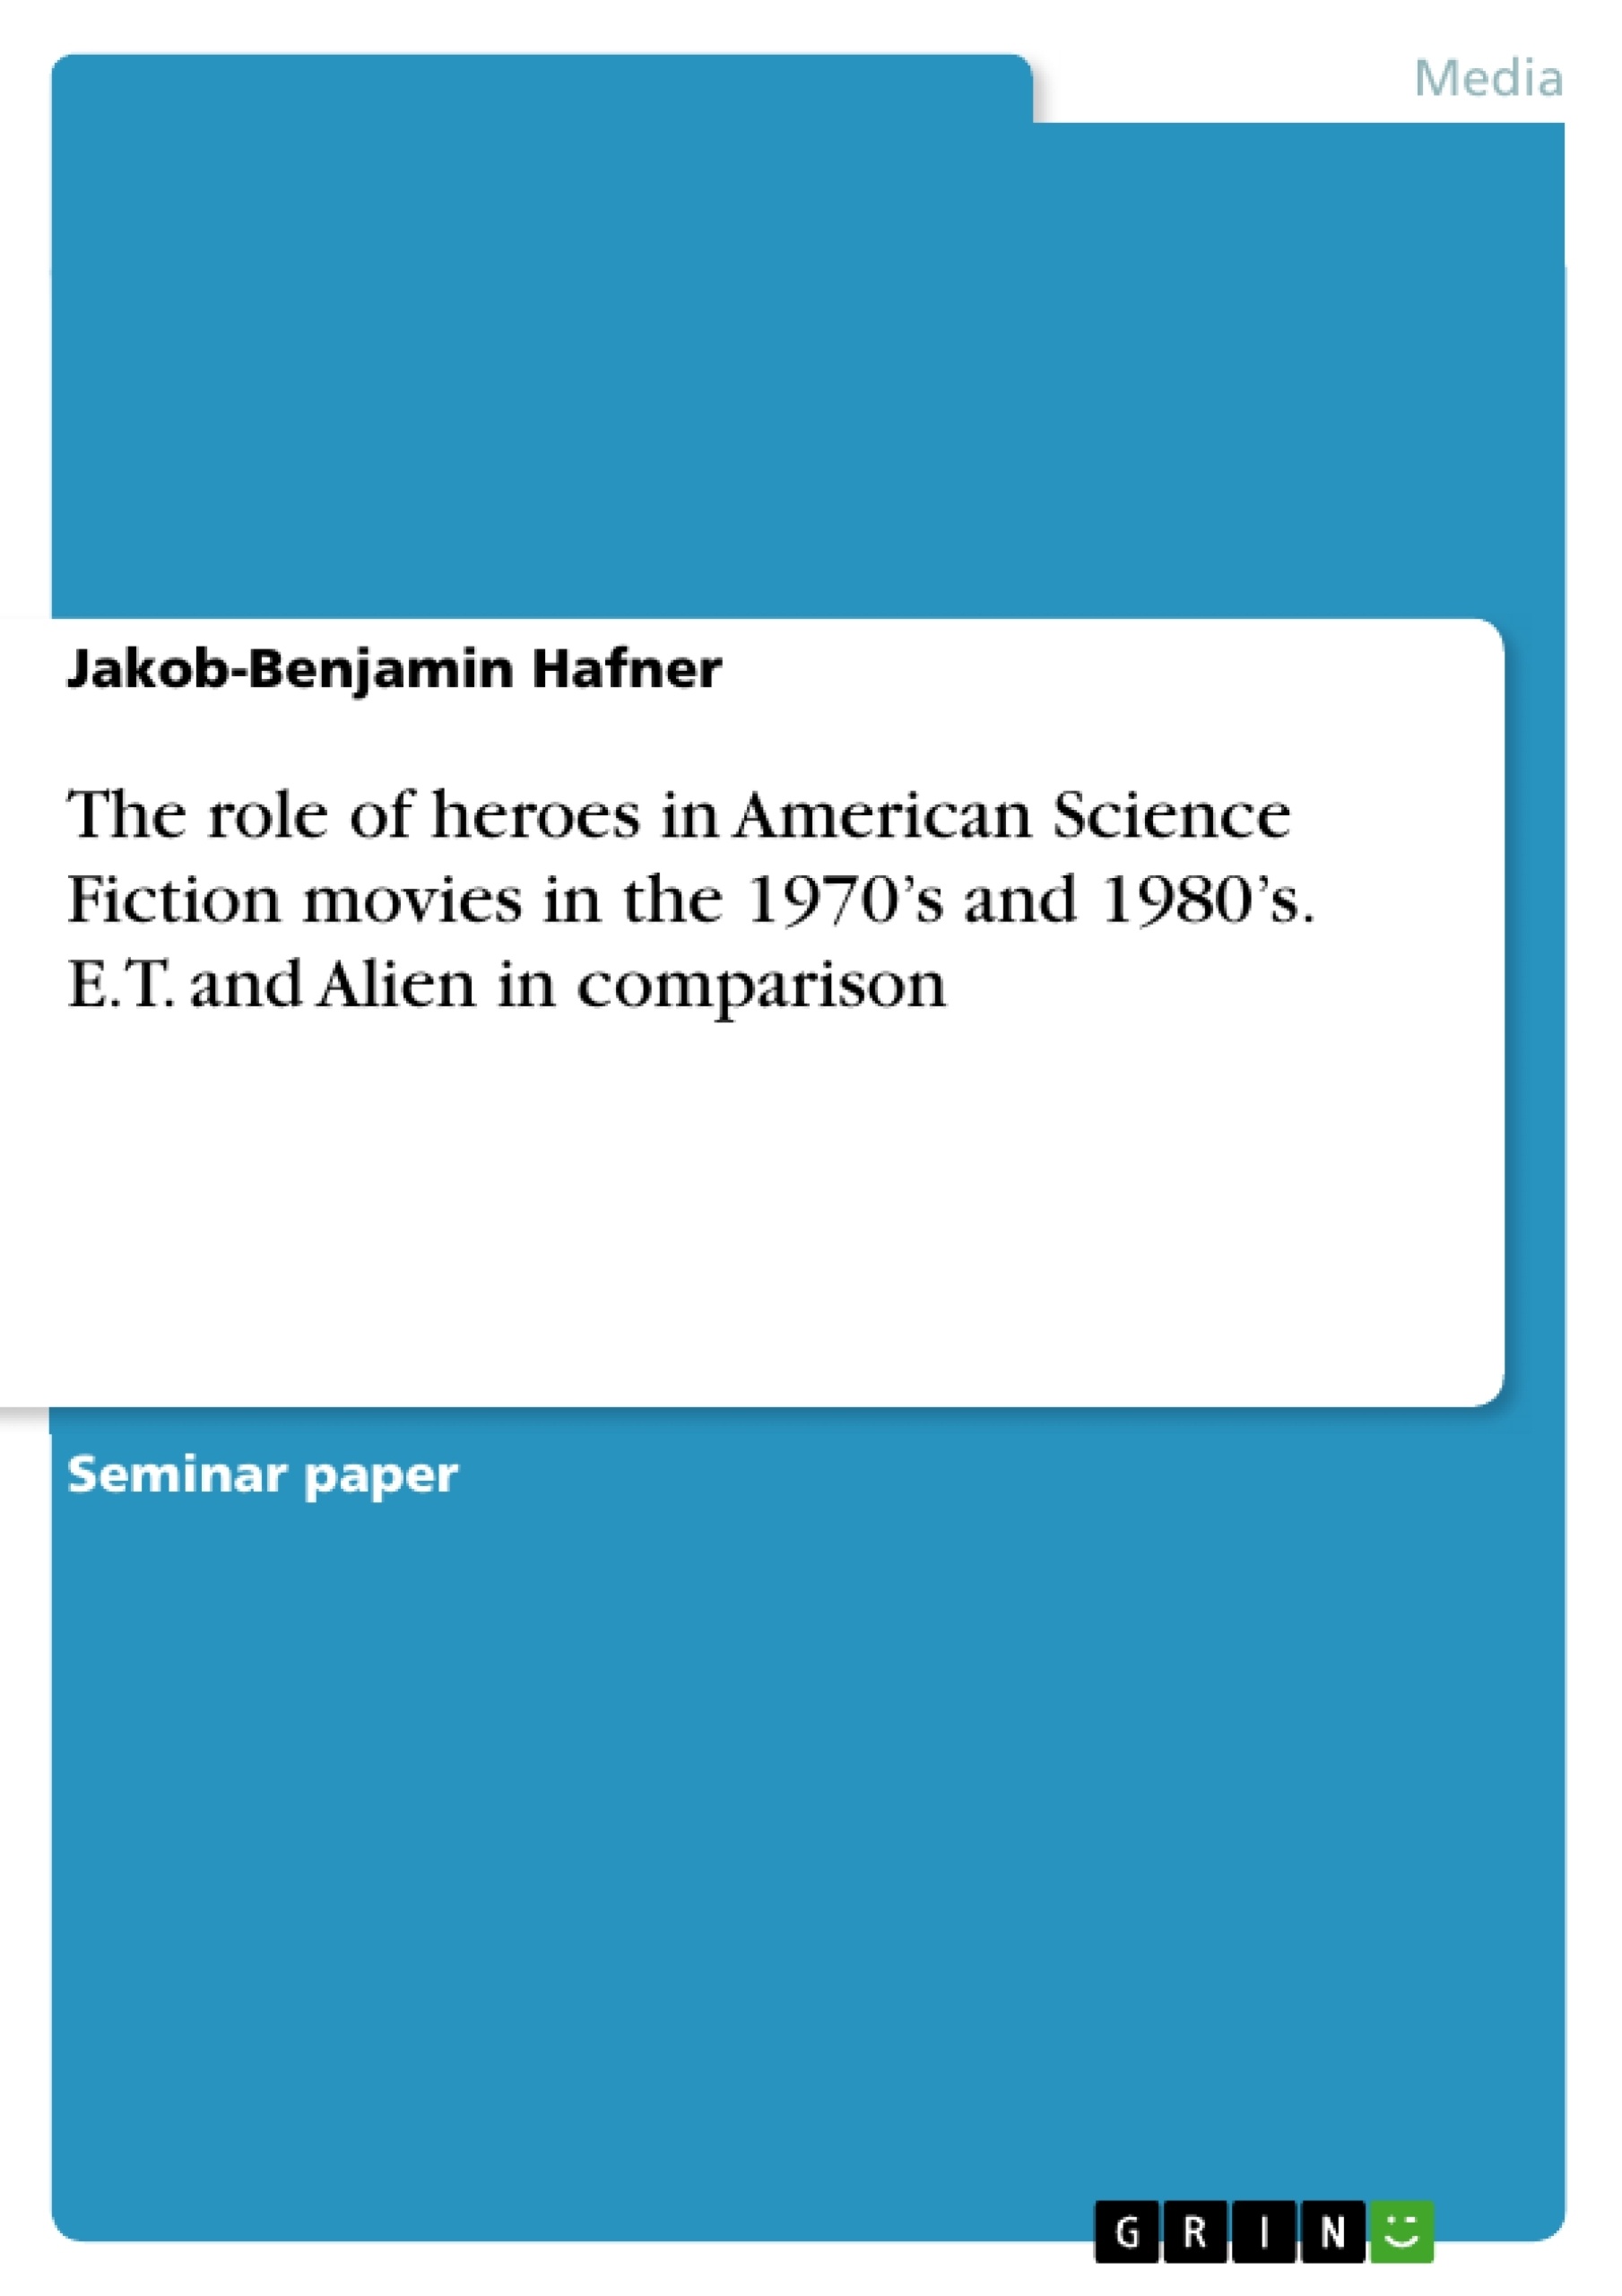 Title: The role of heroes in American Science Fiction movies in the 1970’s and 1980’s. E.T. and Alien in comparison